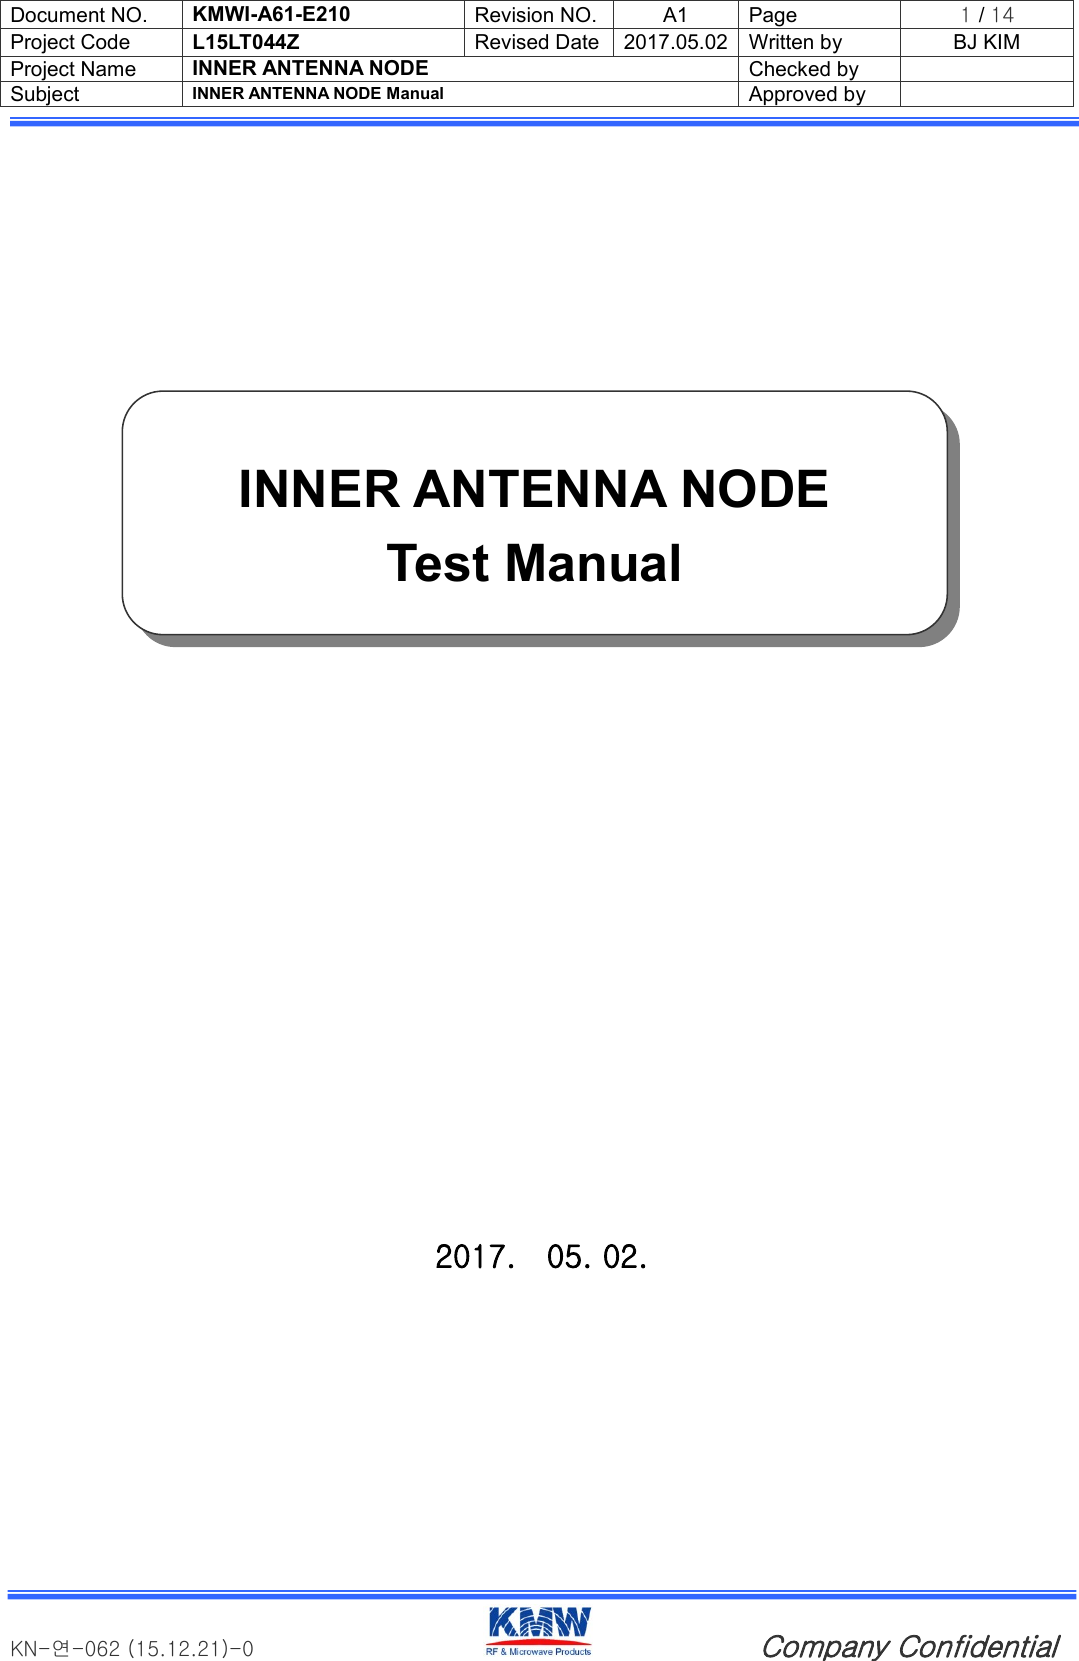 Document NO. KMWI-A61-E210 Revision NO. A1 Page 1 / 14 Project Code L15LT044Z Revised Date 2017.05.02 Written by BJ KIM Project Name INNER ANTENNA NODE Checked by  Subject INNER ANTENNA NODE Manual Approved by    KN-연-062 (15.12.21)-0                                       Company Confidential                                 2017.    05. 02.     INNER ANTENNA NODE Test Manual 